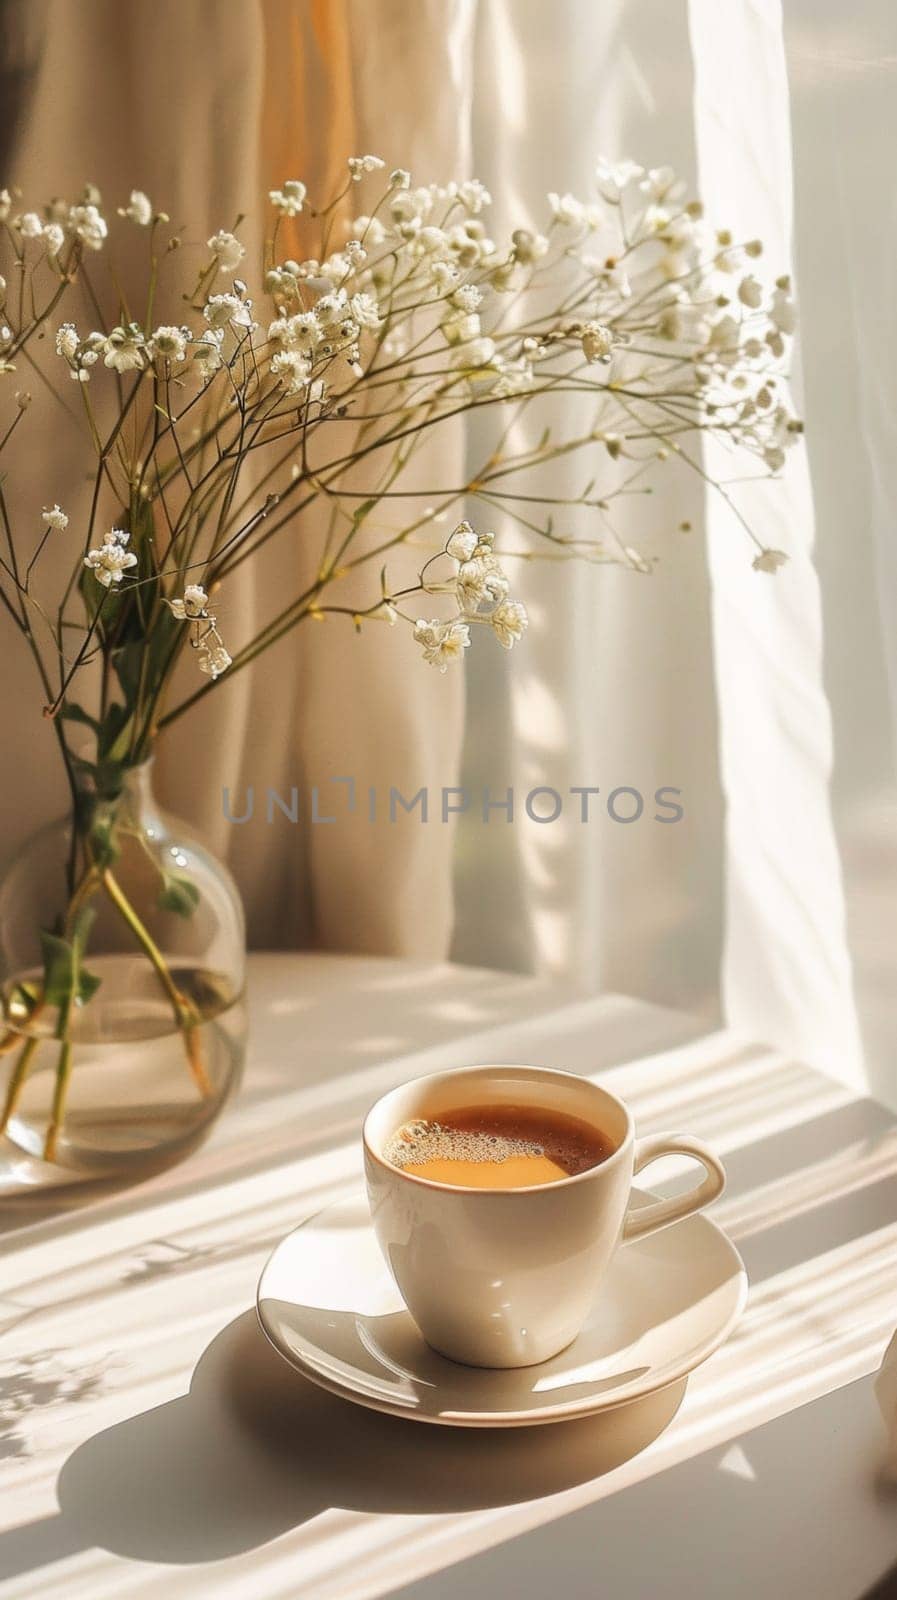 A cup of coffee on a table next to some flowers